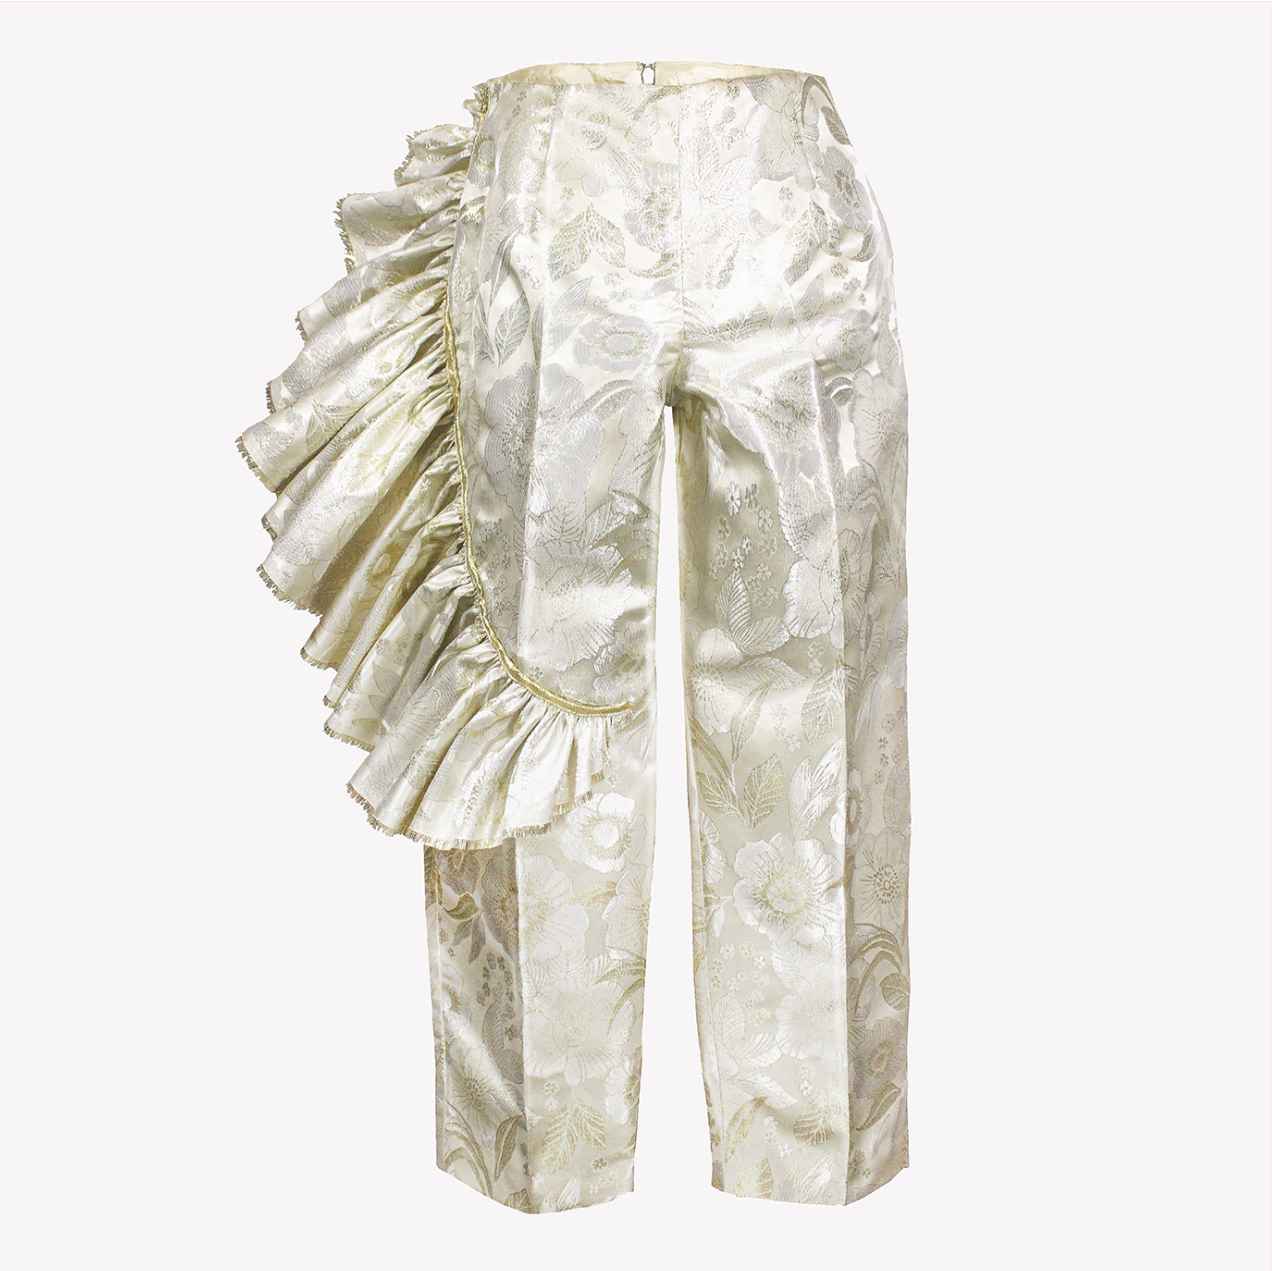 Gold brocade trousers with asymmetric ruffle